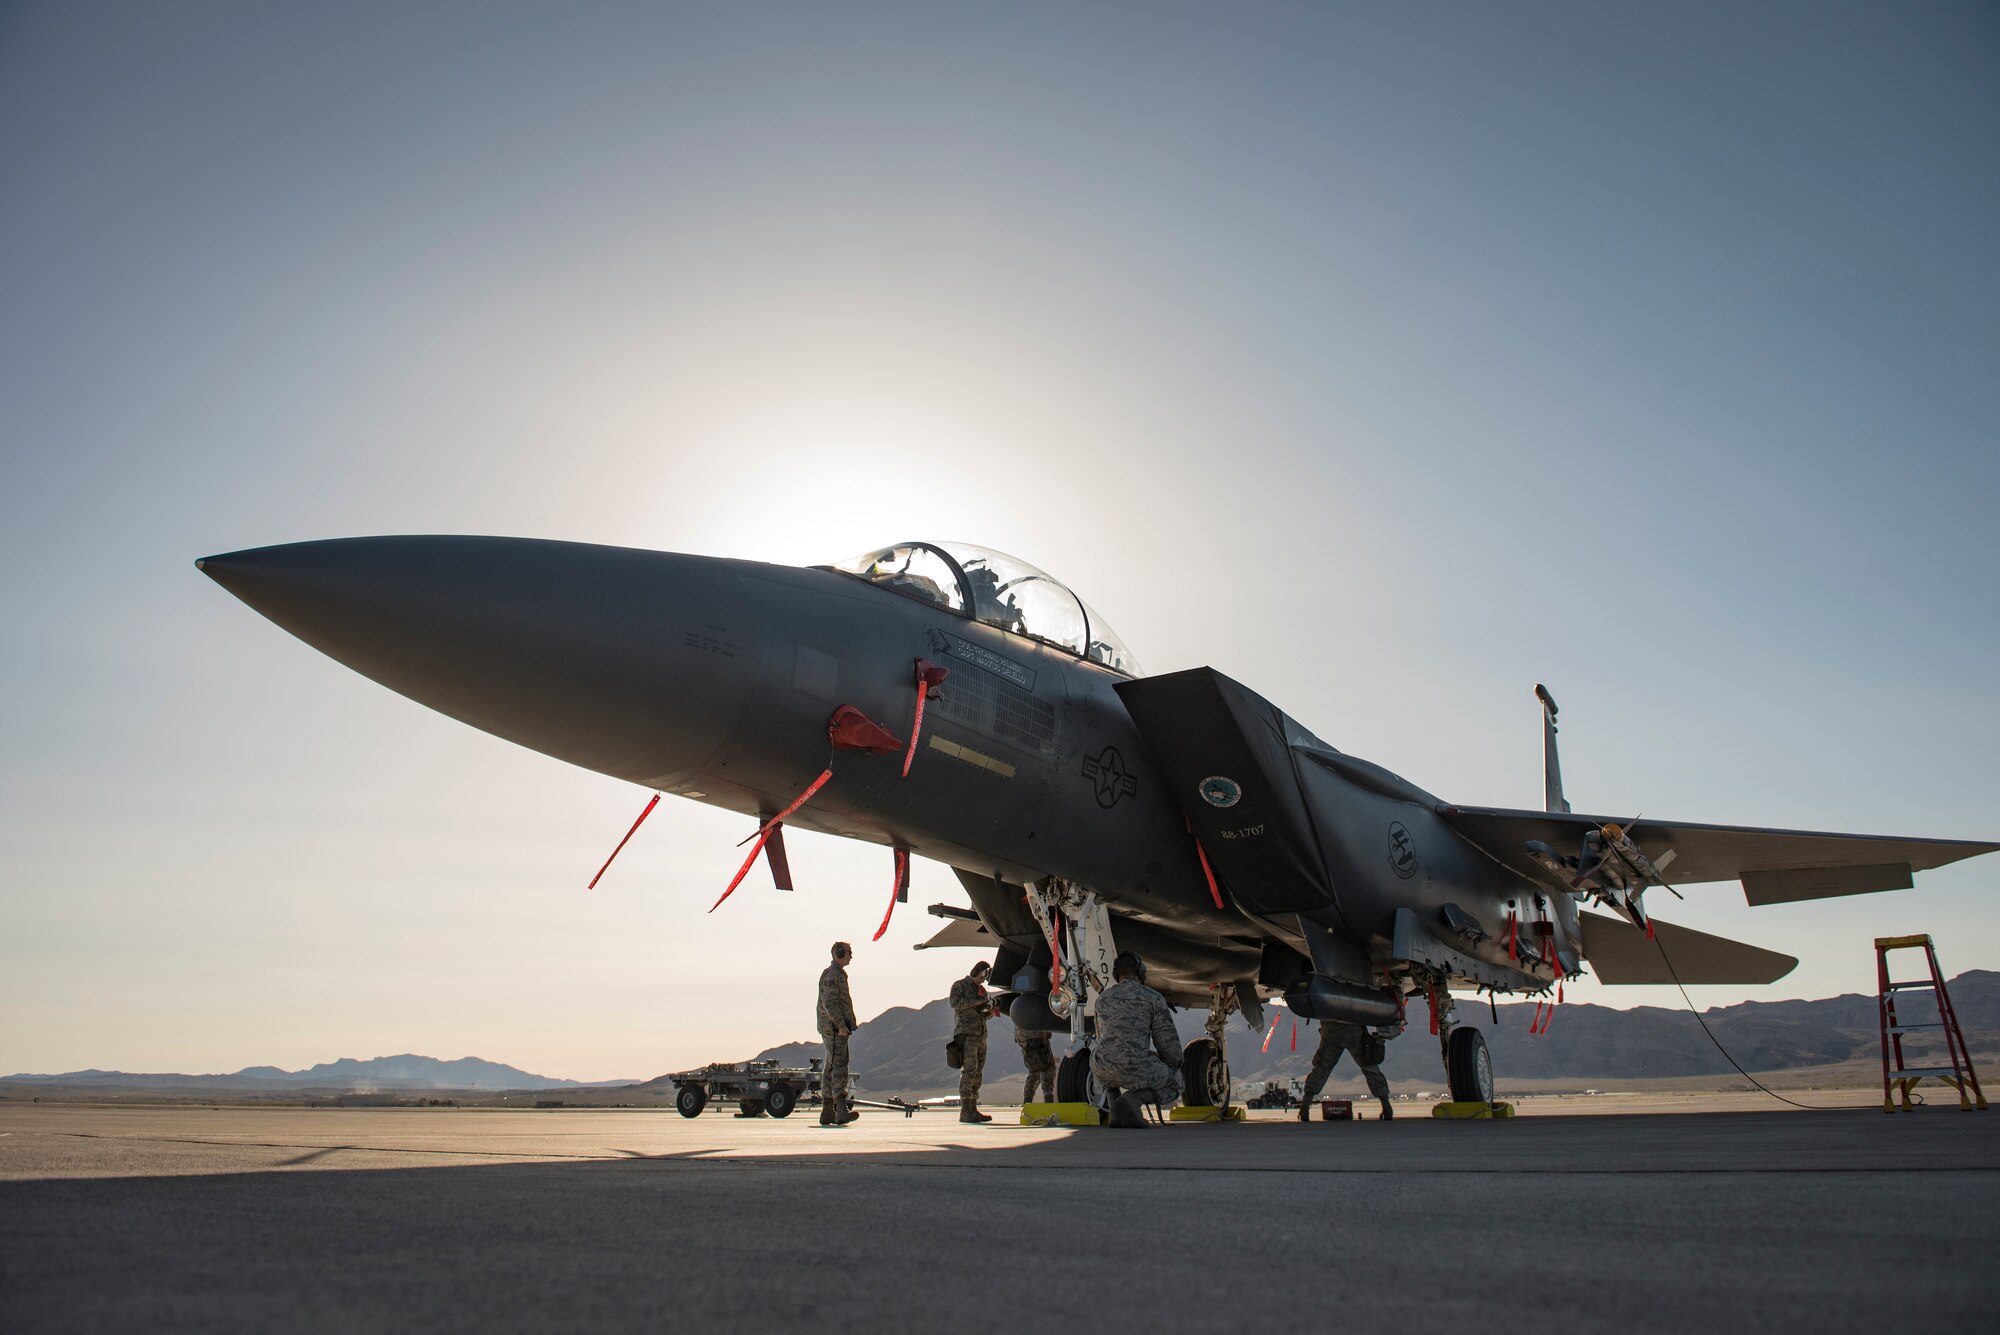 Airmen assigned to the 389th Aircraft Maintenance Unit, Mountain Home Air Force Base, Idaho, perform final checks on an F-15 Eagle fighter jet during a load crew competition at Nellis Air Force Base, Nevada, April 13, 2018. Each team consisted of three members who played a specific role in the competition to increase their team's success by working as one cohesive unit.(U.S. Air Force photo by Airman 1st Class Andrew D. Sarver)